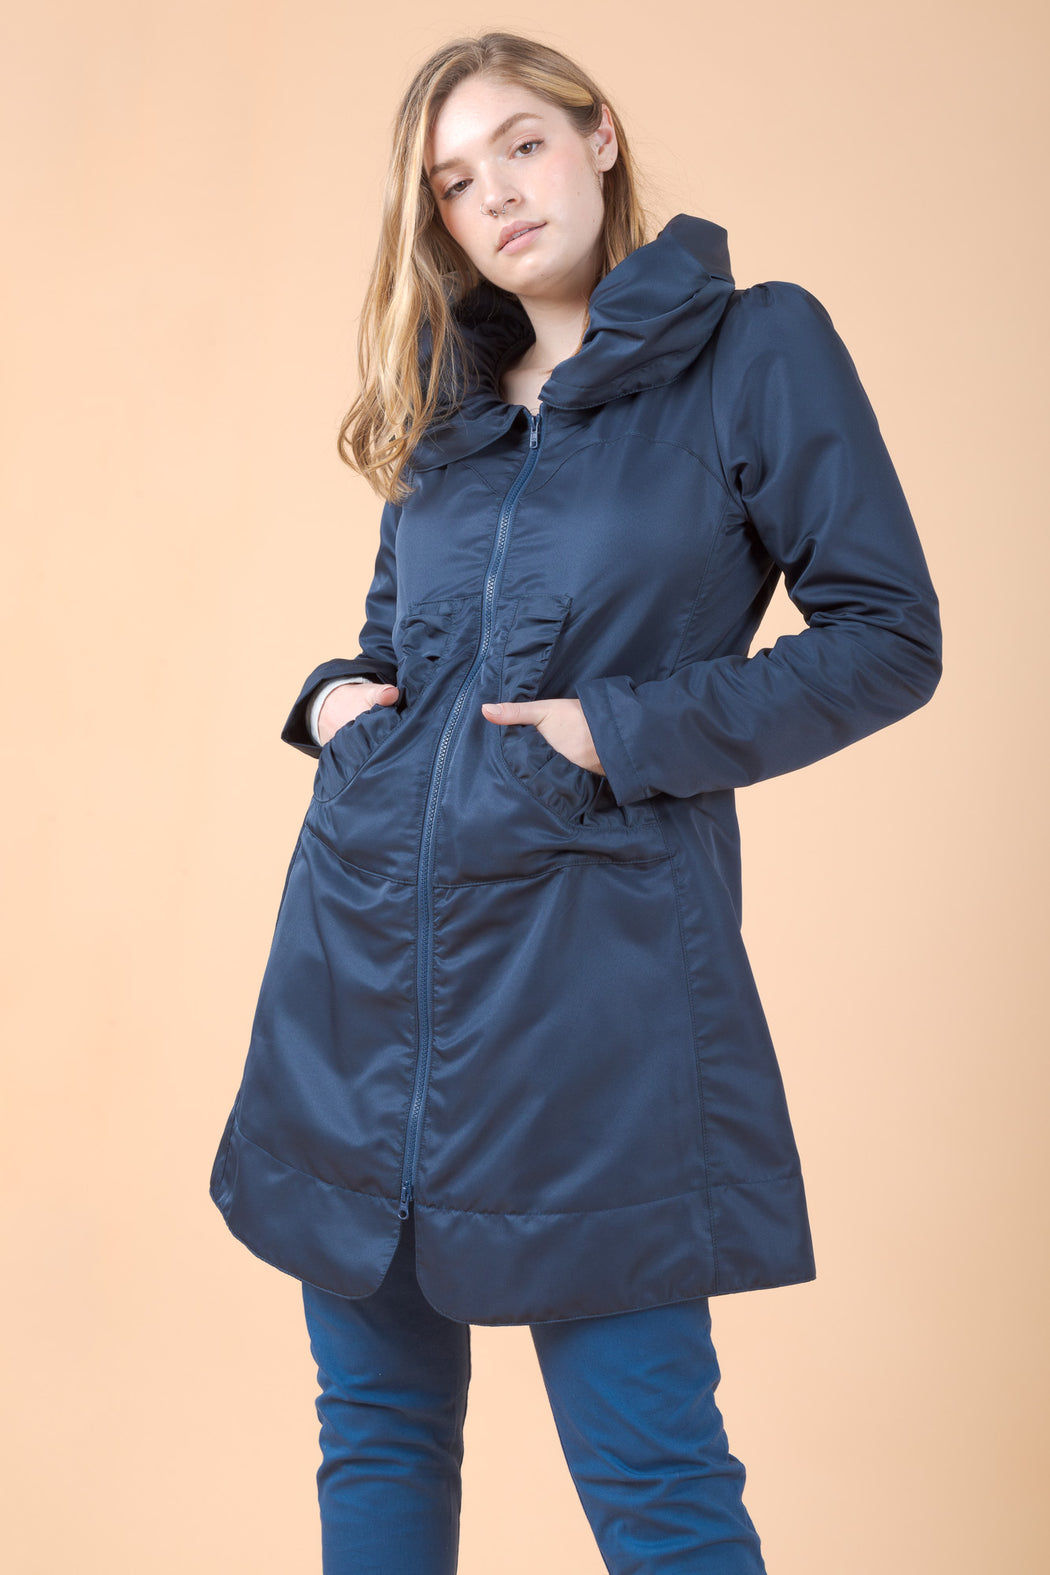 Prairie Underground Long Raincloak in Navy. a Victorian-style Raincoat with a romantic, billowing hood and soft cotton lining.